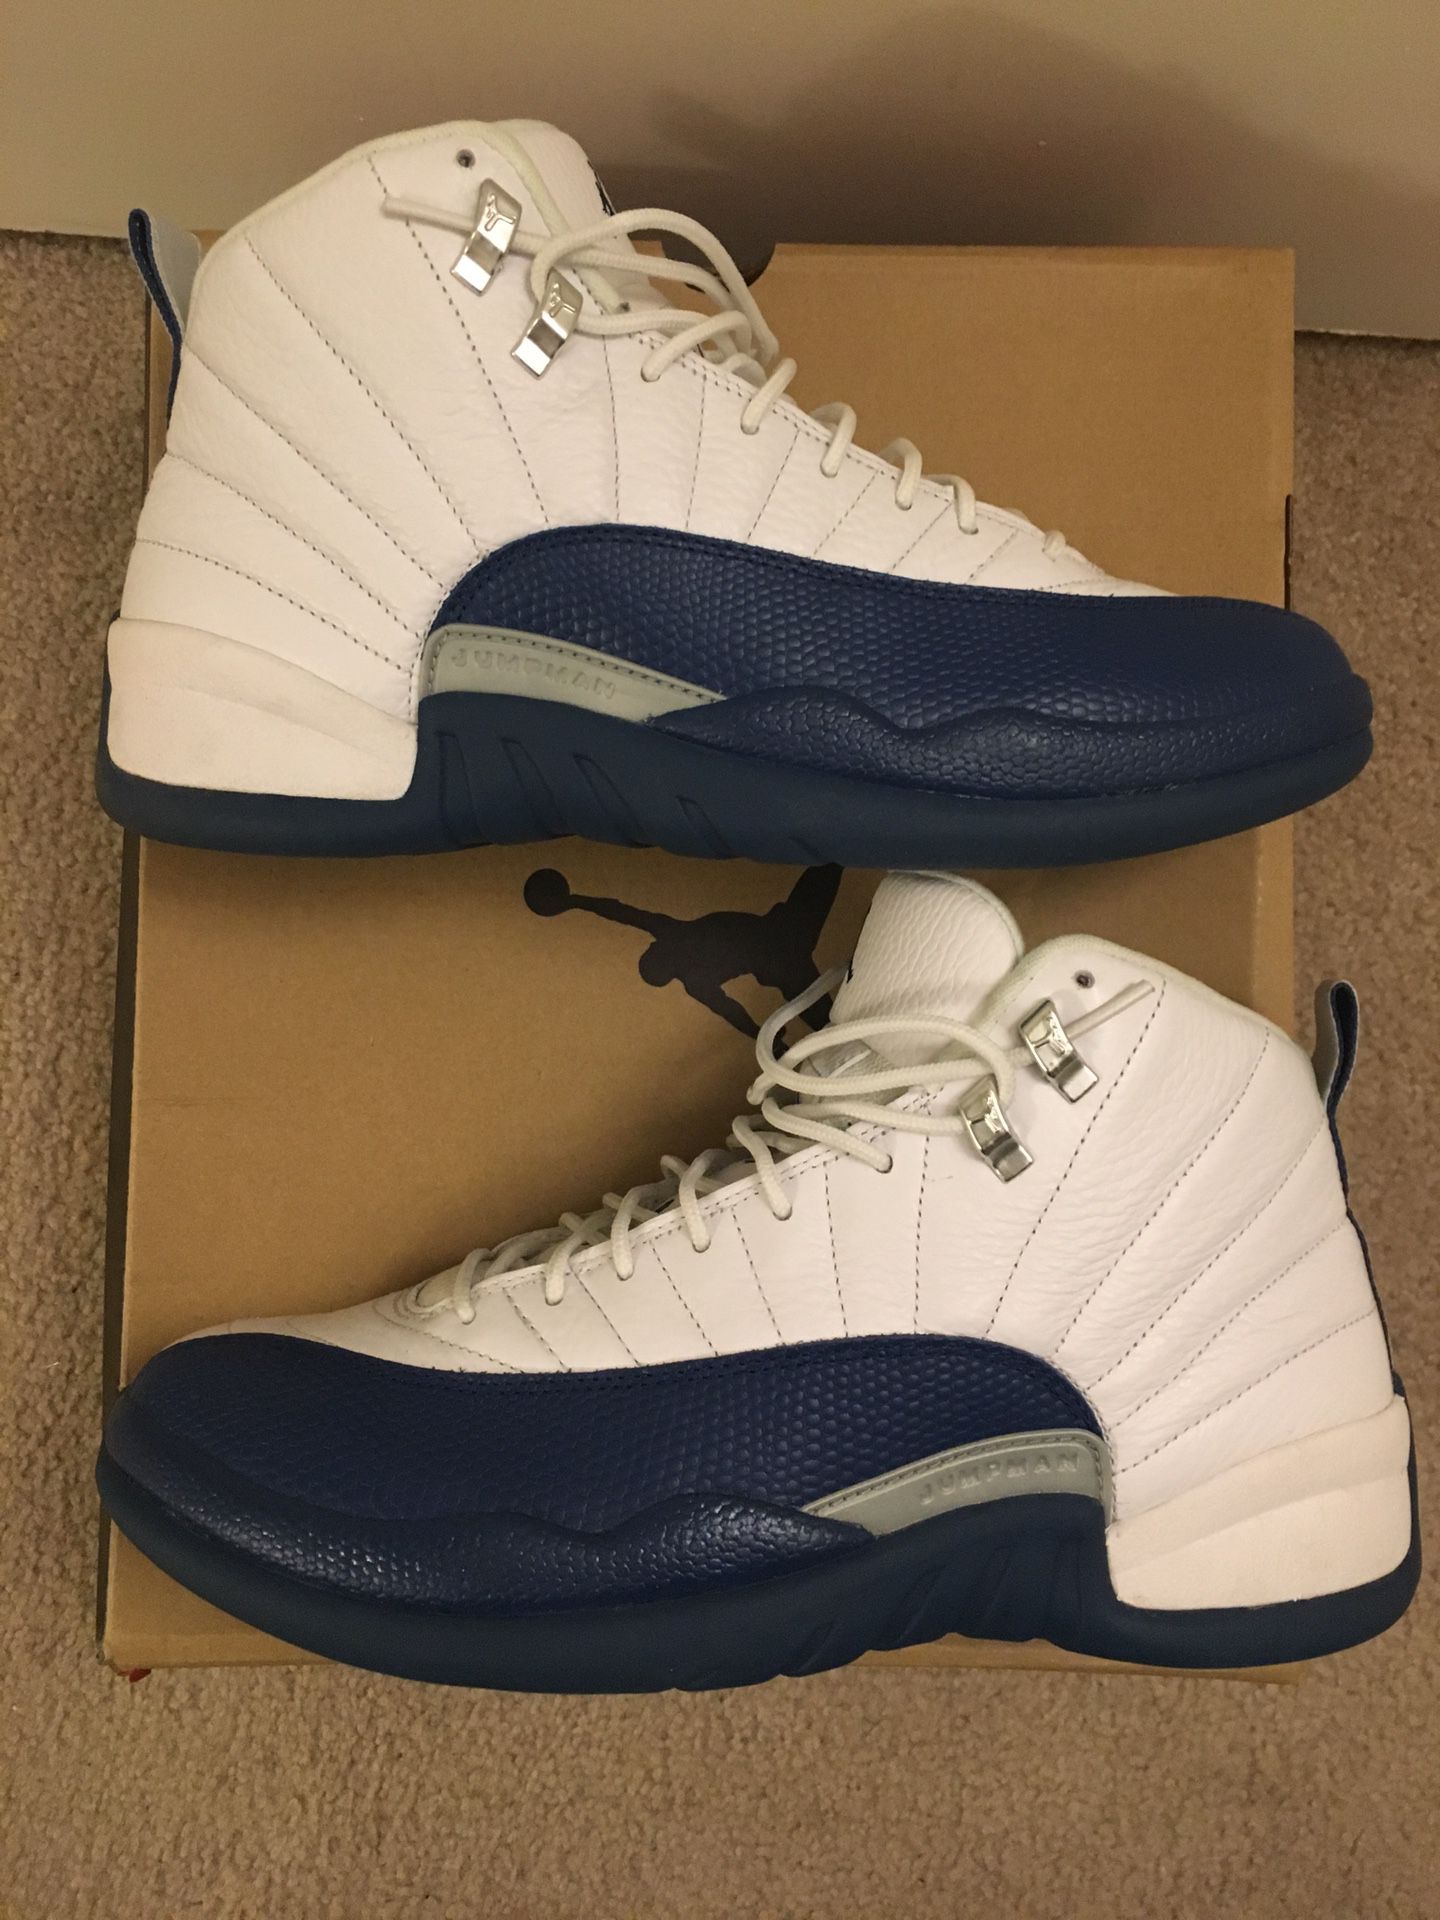 Men's French blue 12s size 10.5